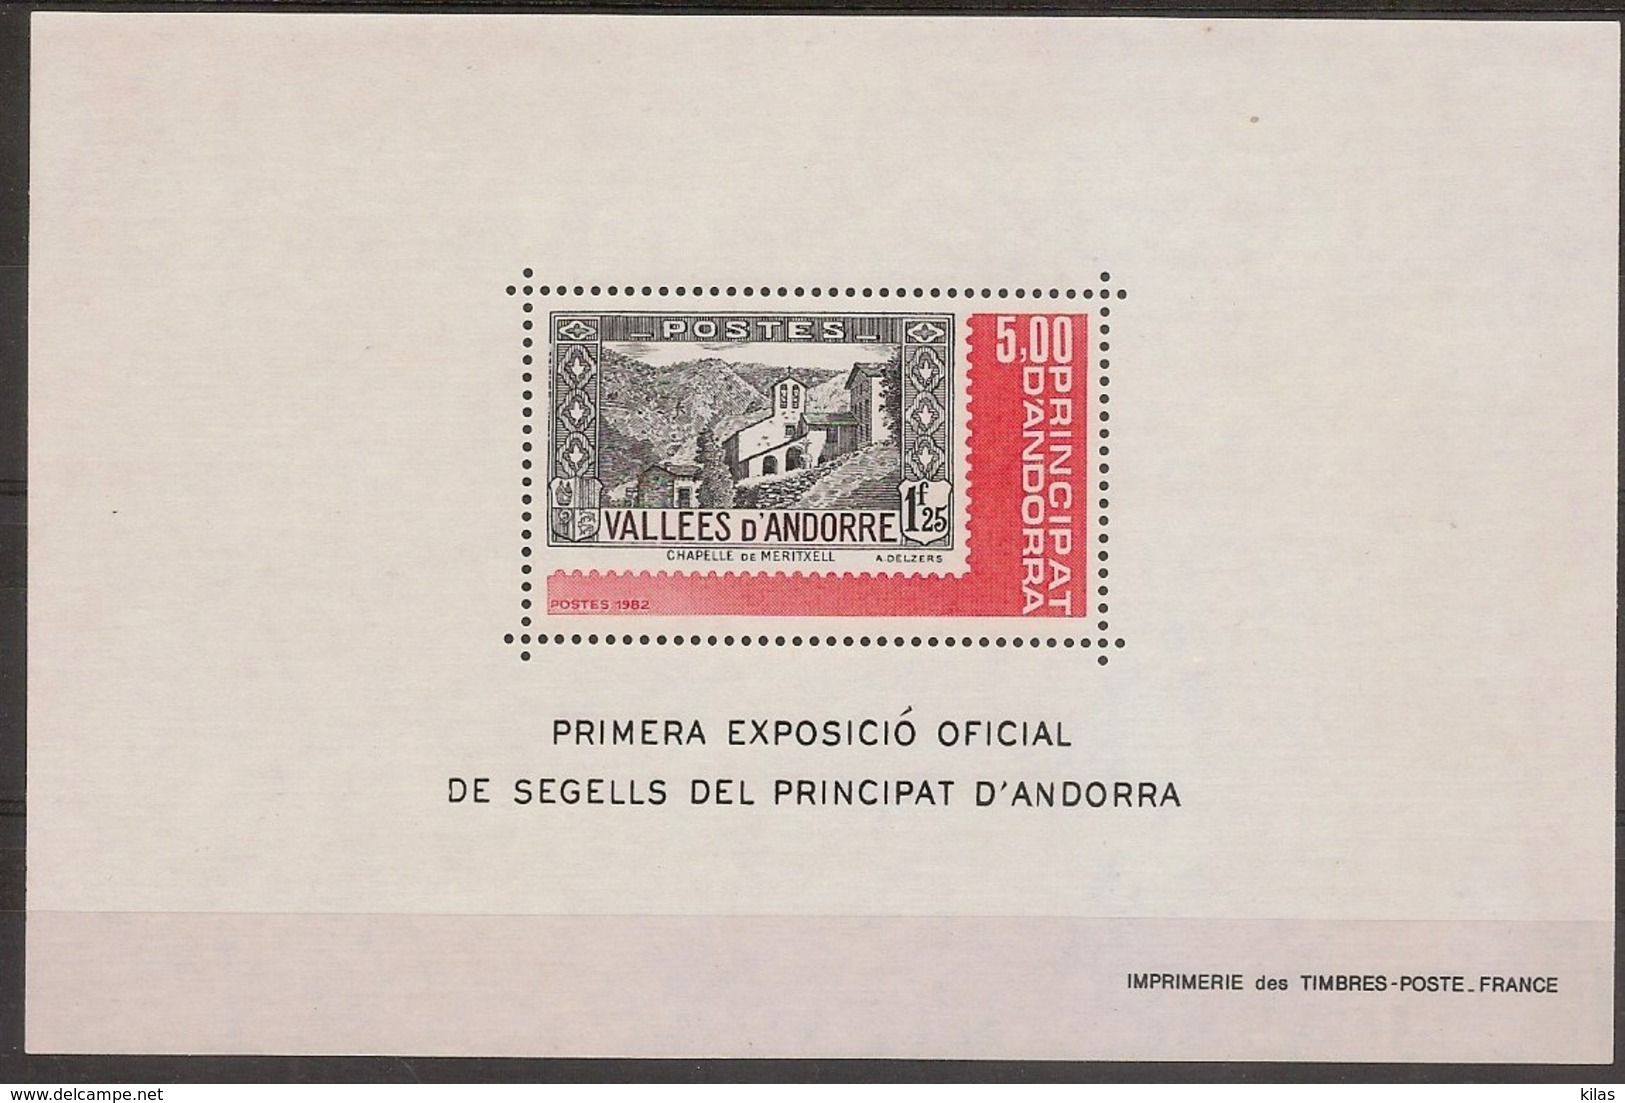 ANDORRA FRENCH 1982, Stamp Exposition - Hojas Bloque